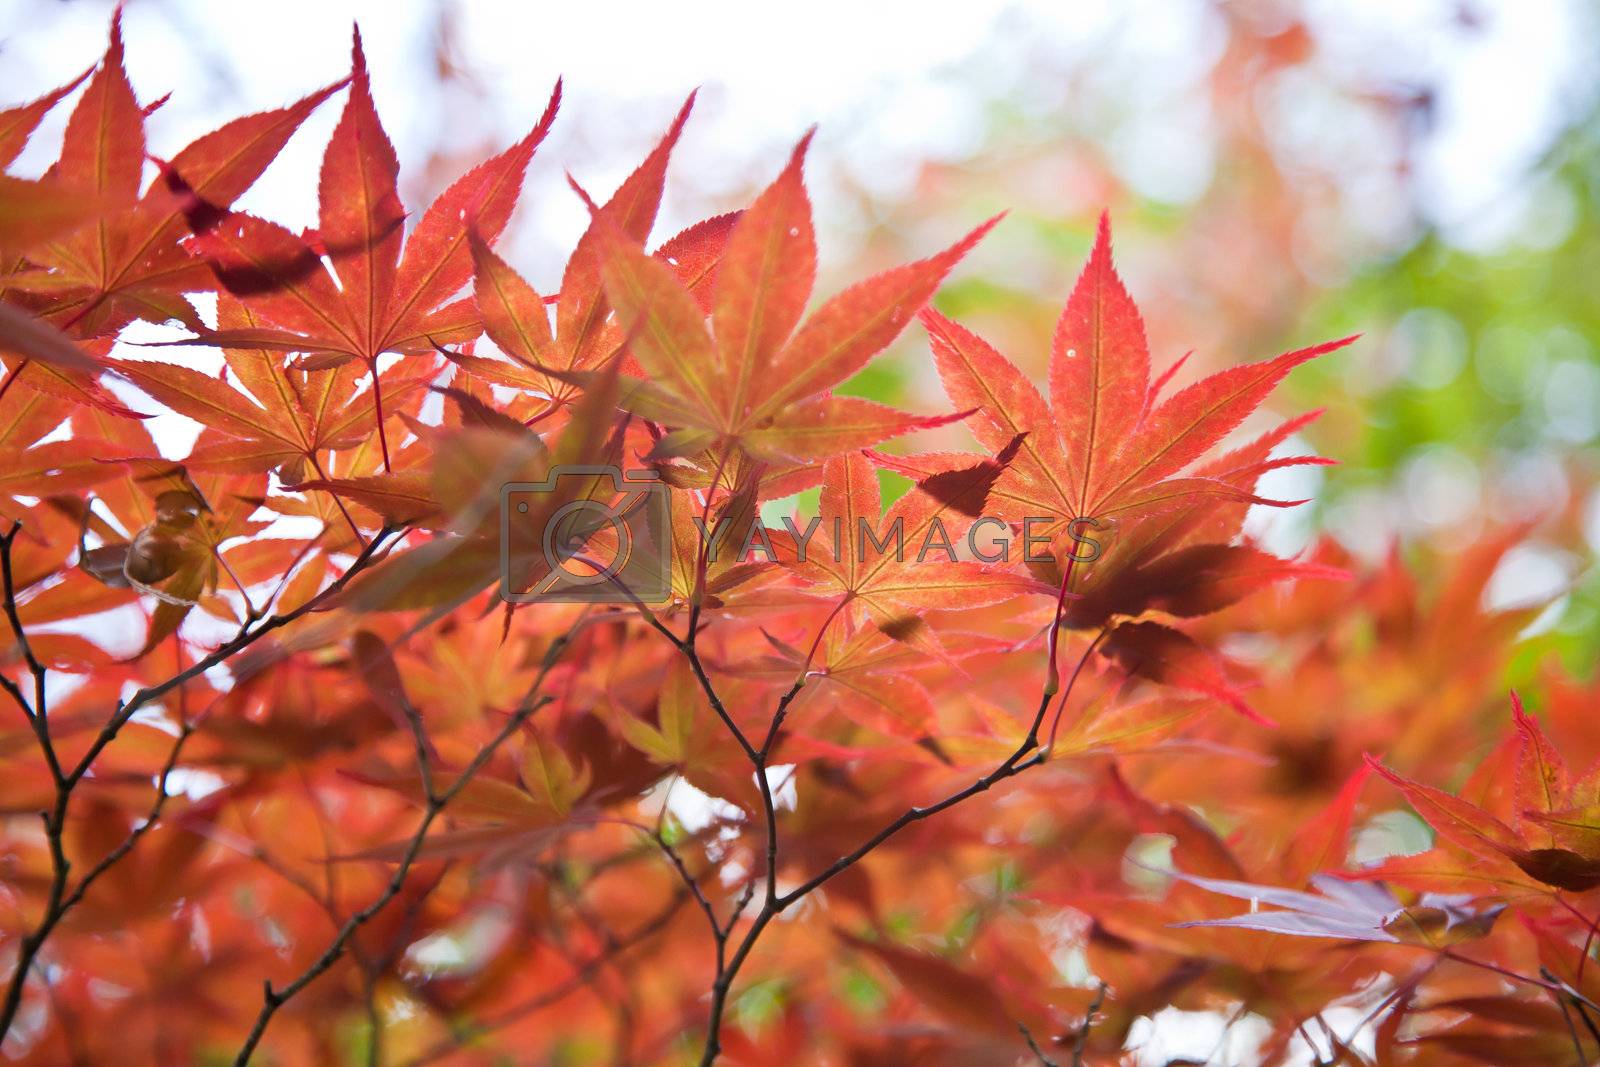 Royalty free image of Autumnal, Red leaves of mable by Suriyaphoto